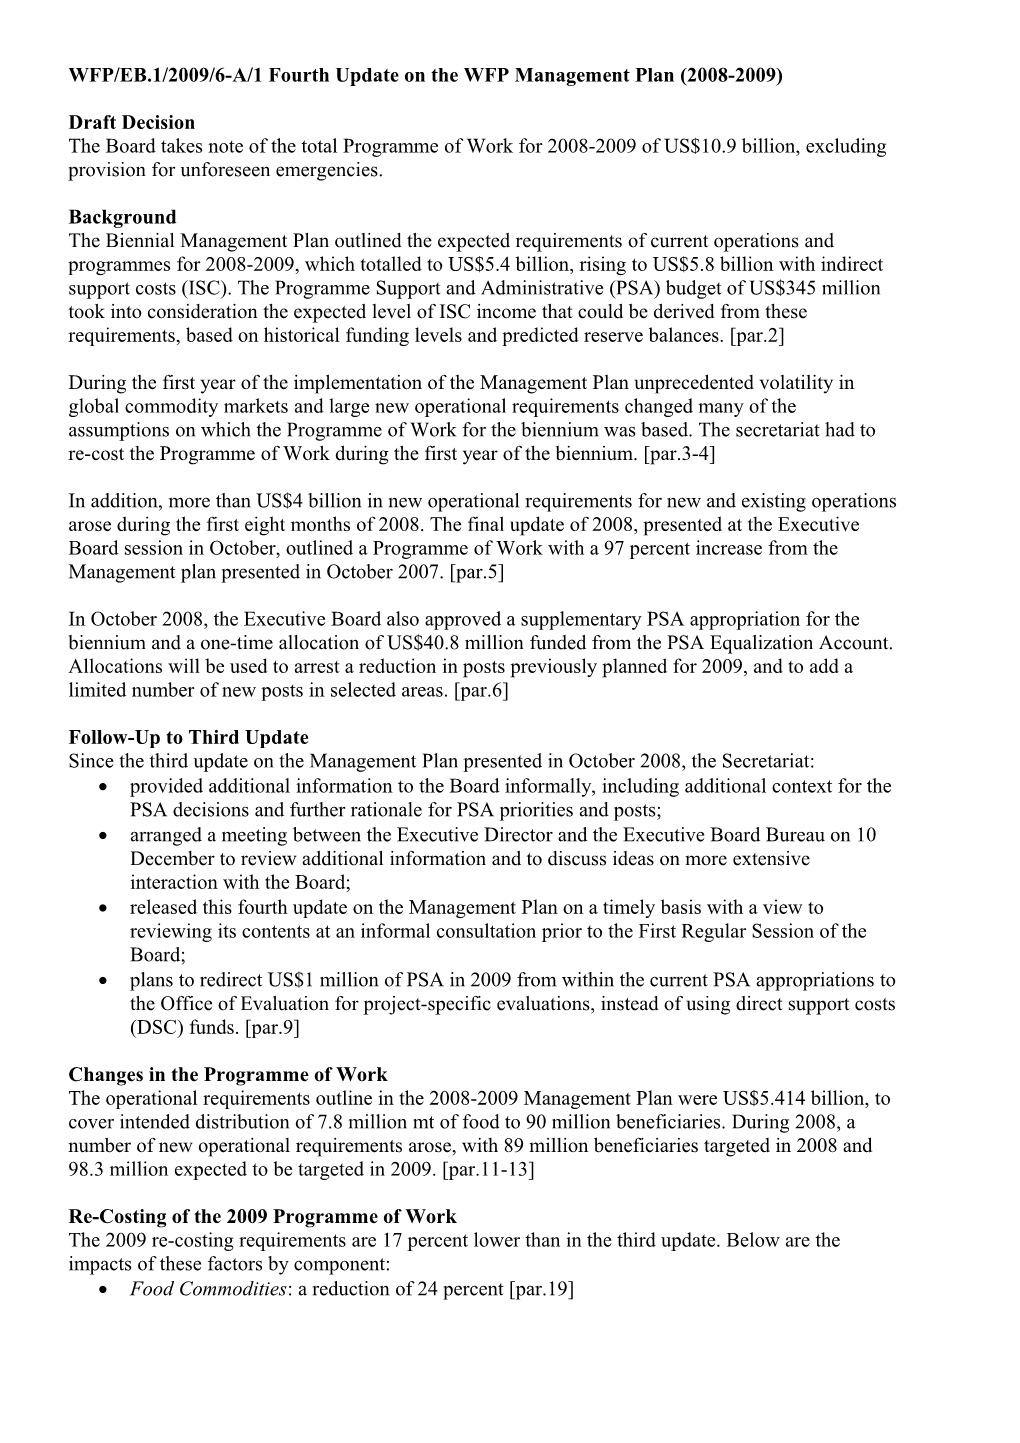 WFP/EB.1/2009/6-A/1 Fourth Update on the WFP Management Plan (2008-2009)